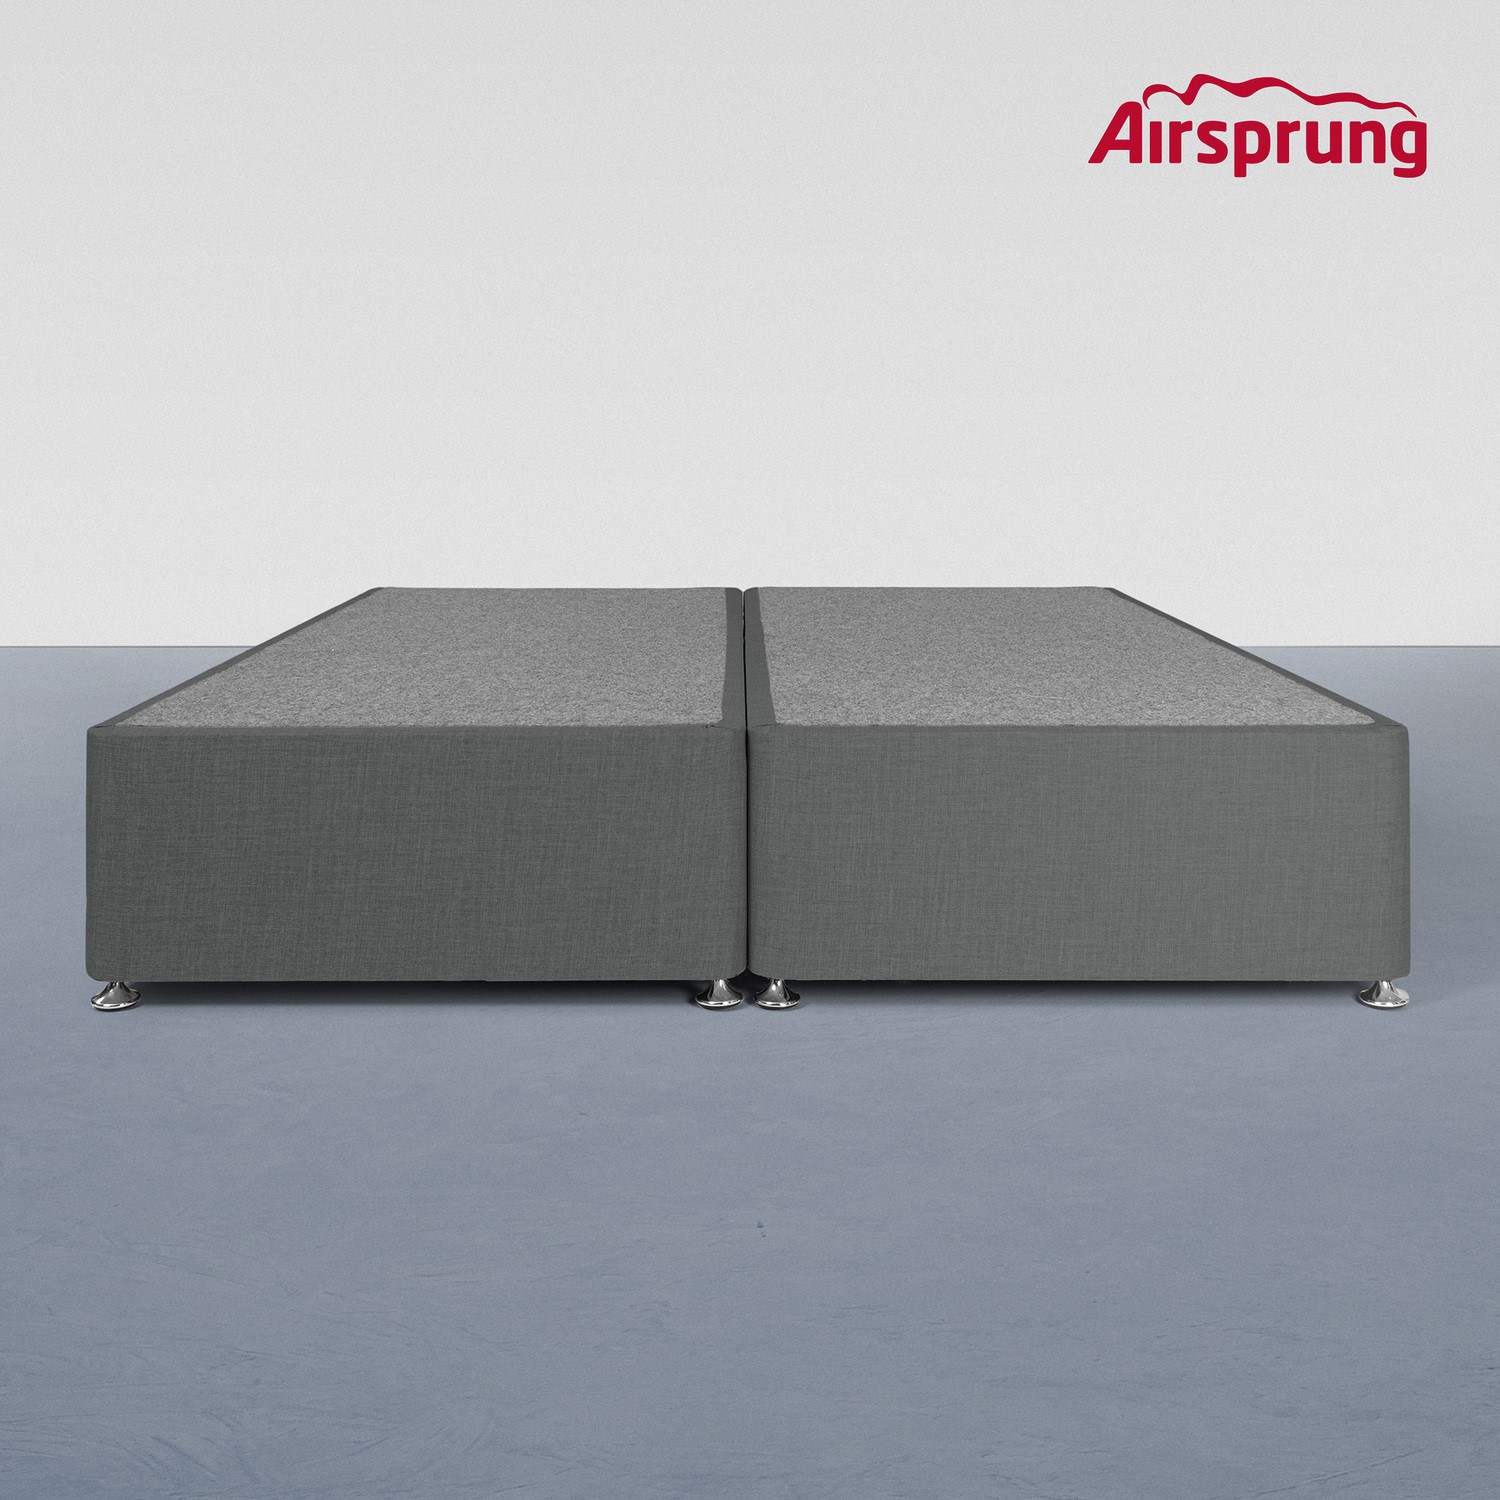 Read more about Airsprung kelston super king divan charcoal